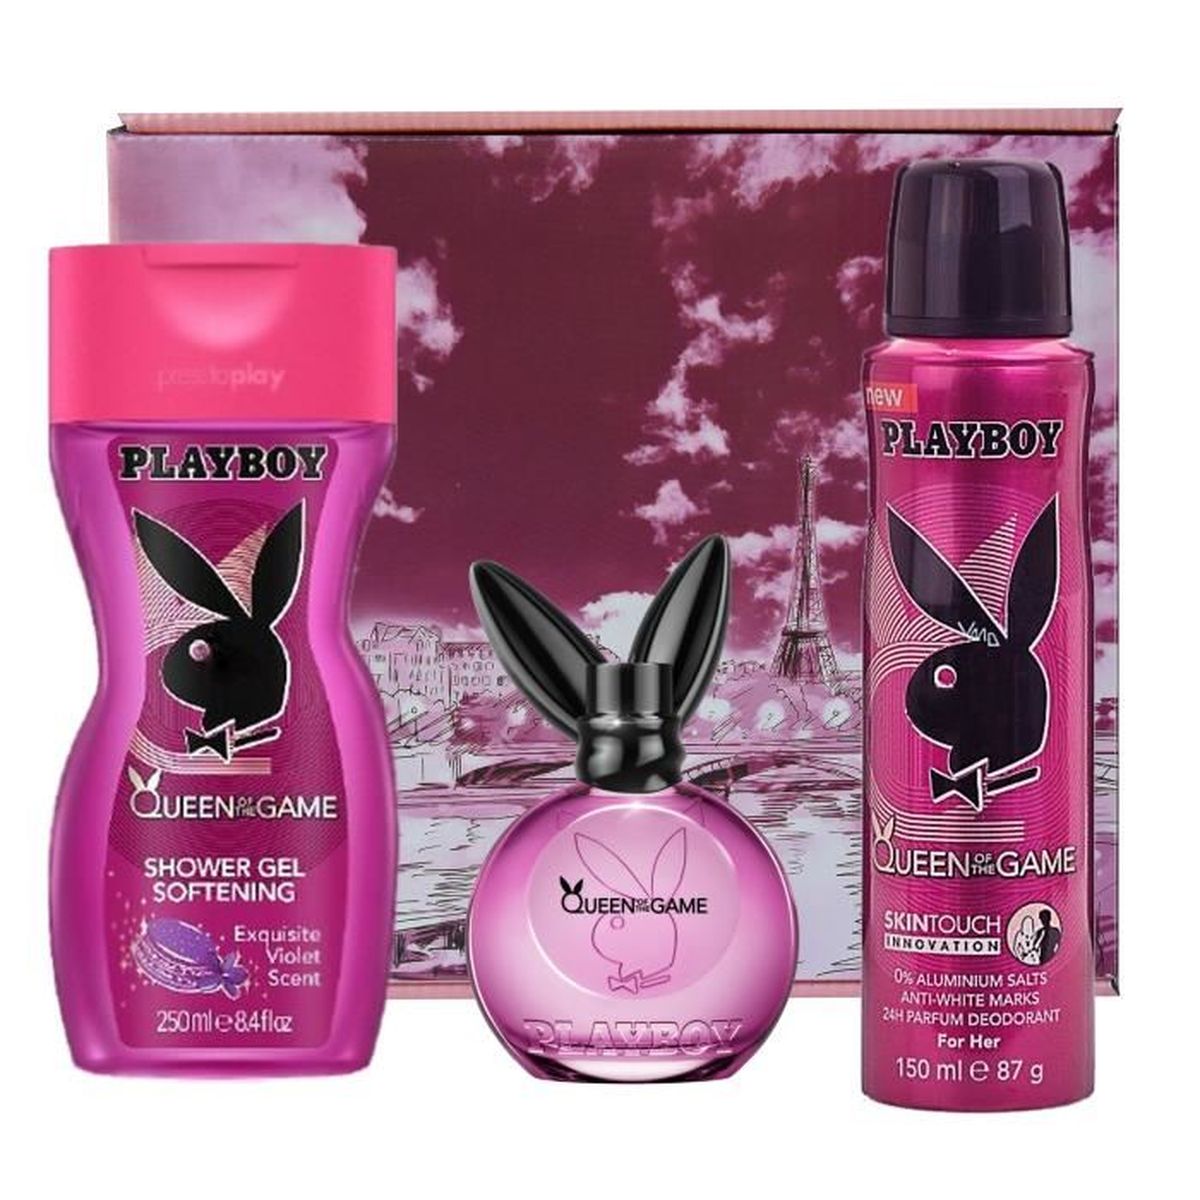 Image result for Playboy 24h Parfum Deodorant for Her Queen of the Game 150ml